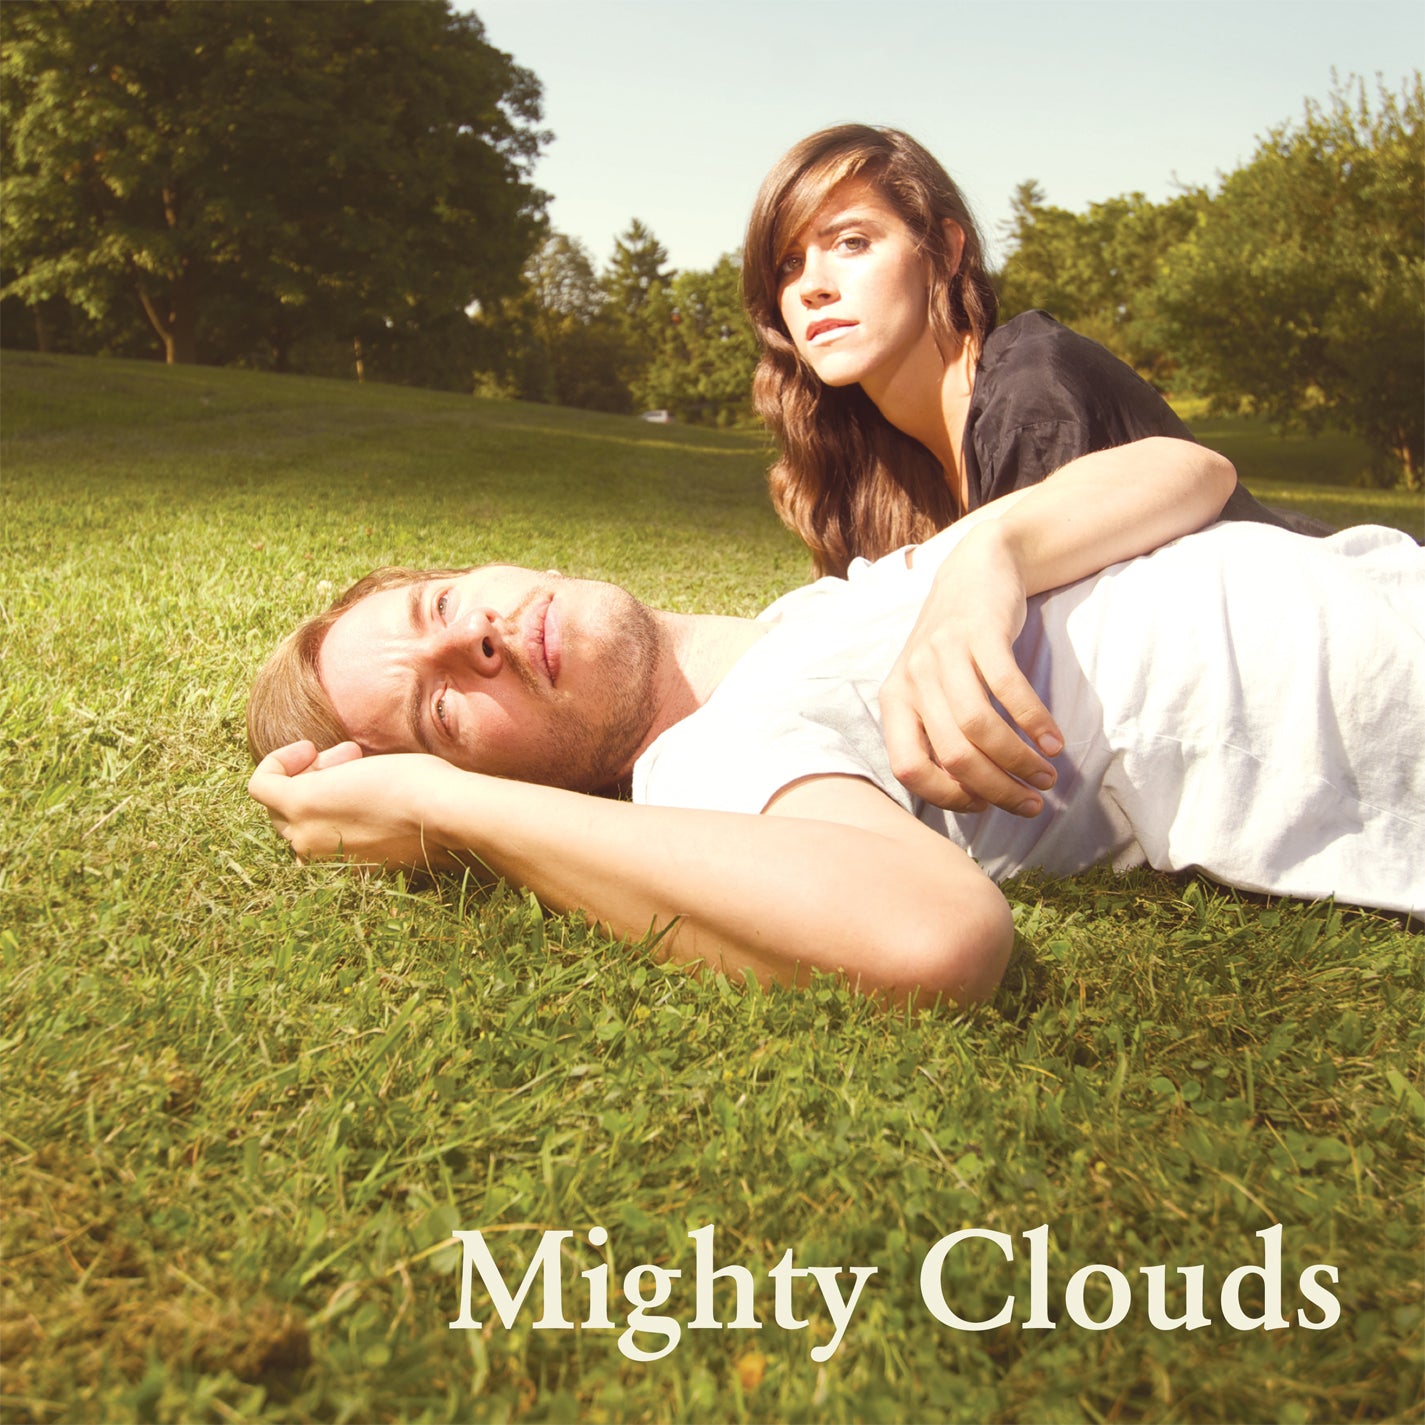 MIGHTY CLOUDS "MIGHTY CLOUDS"